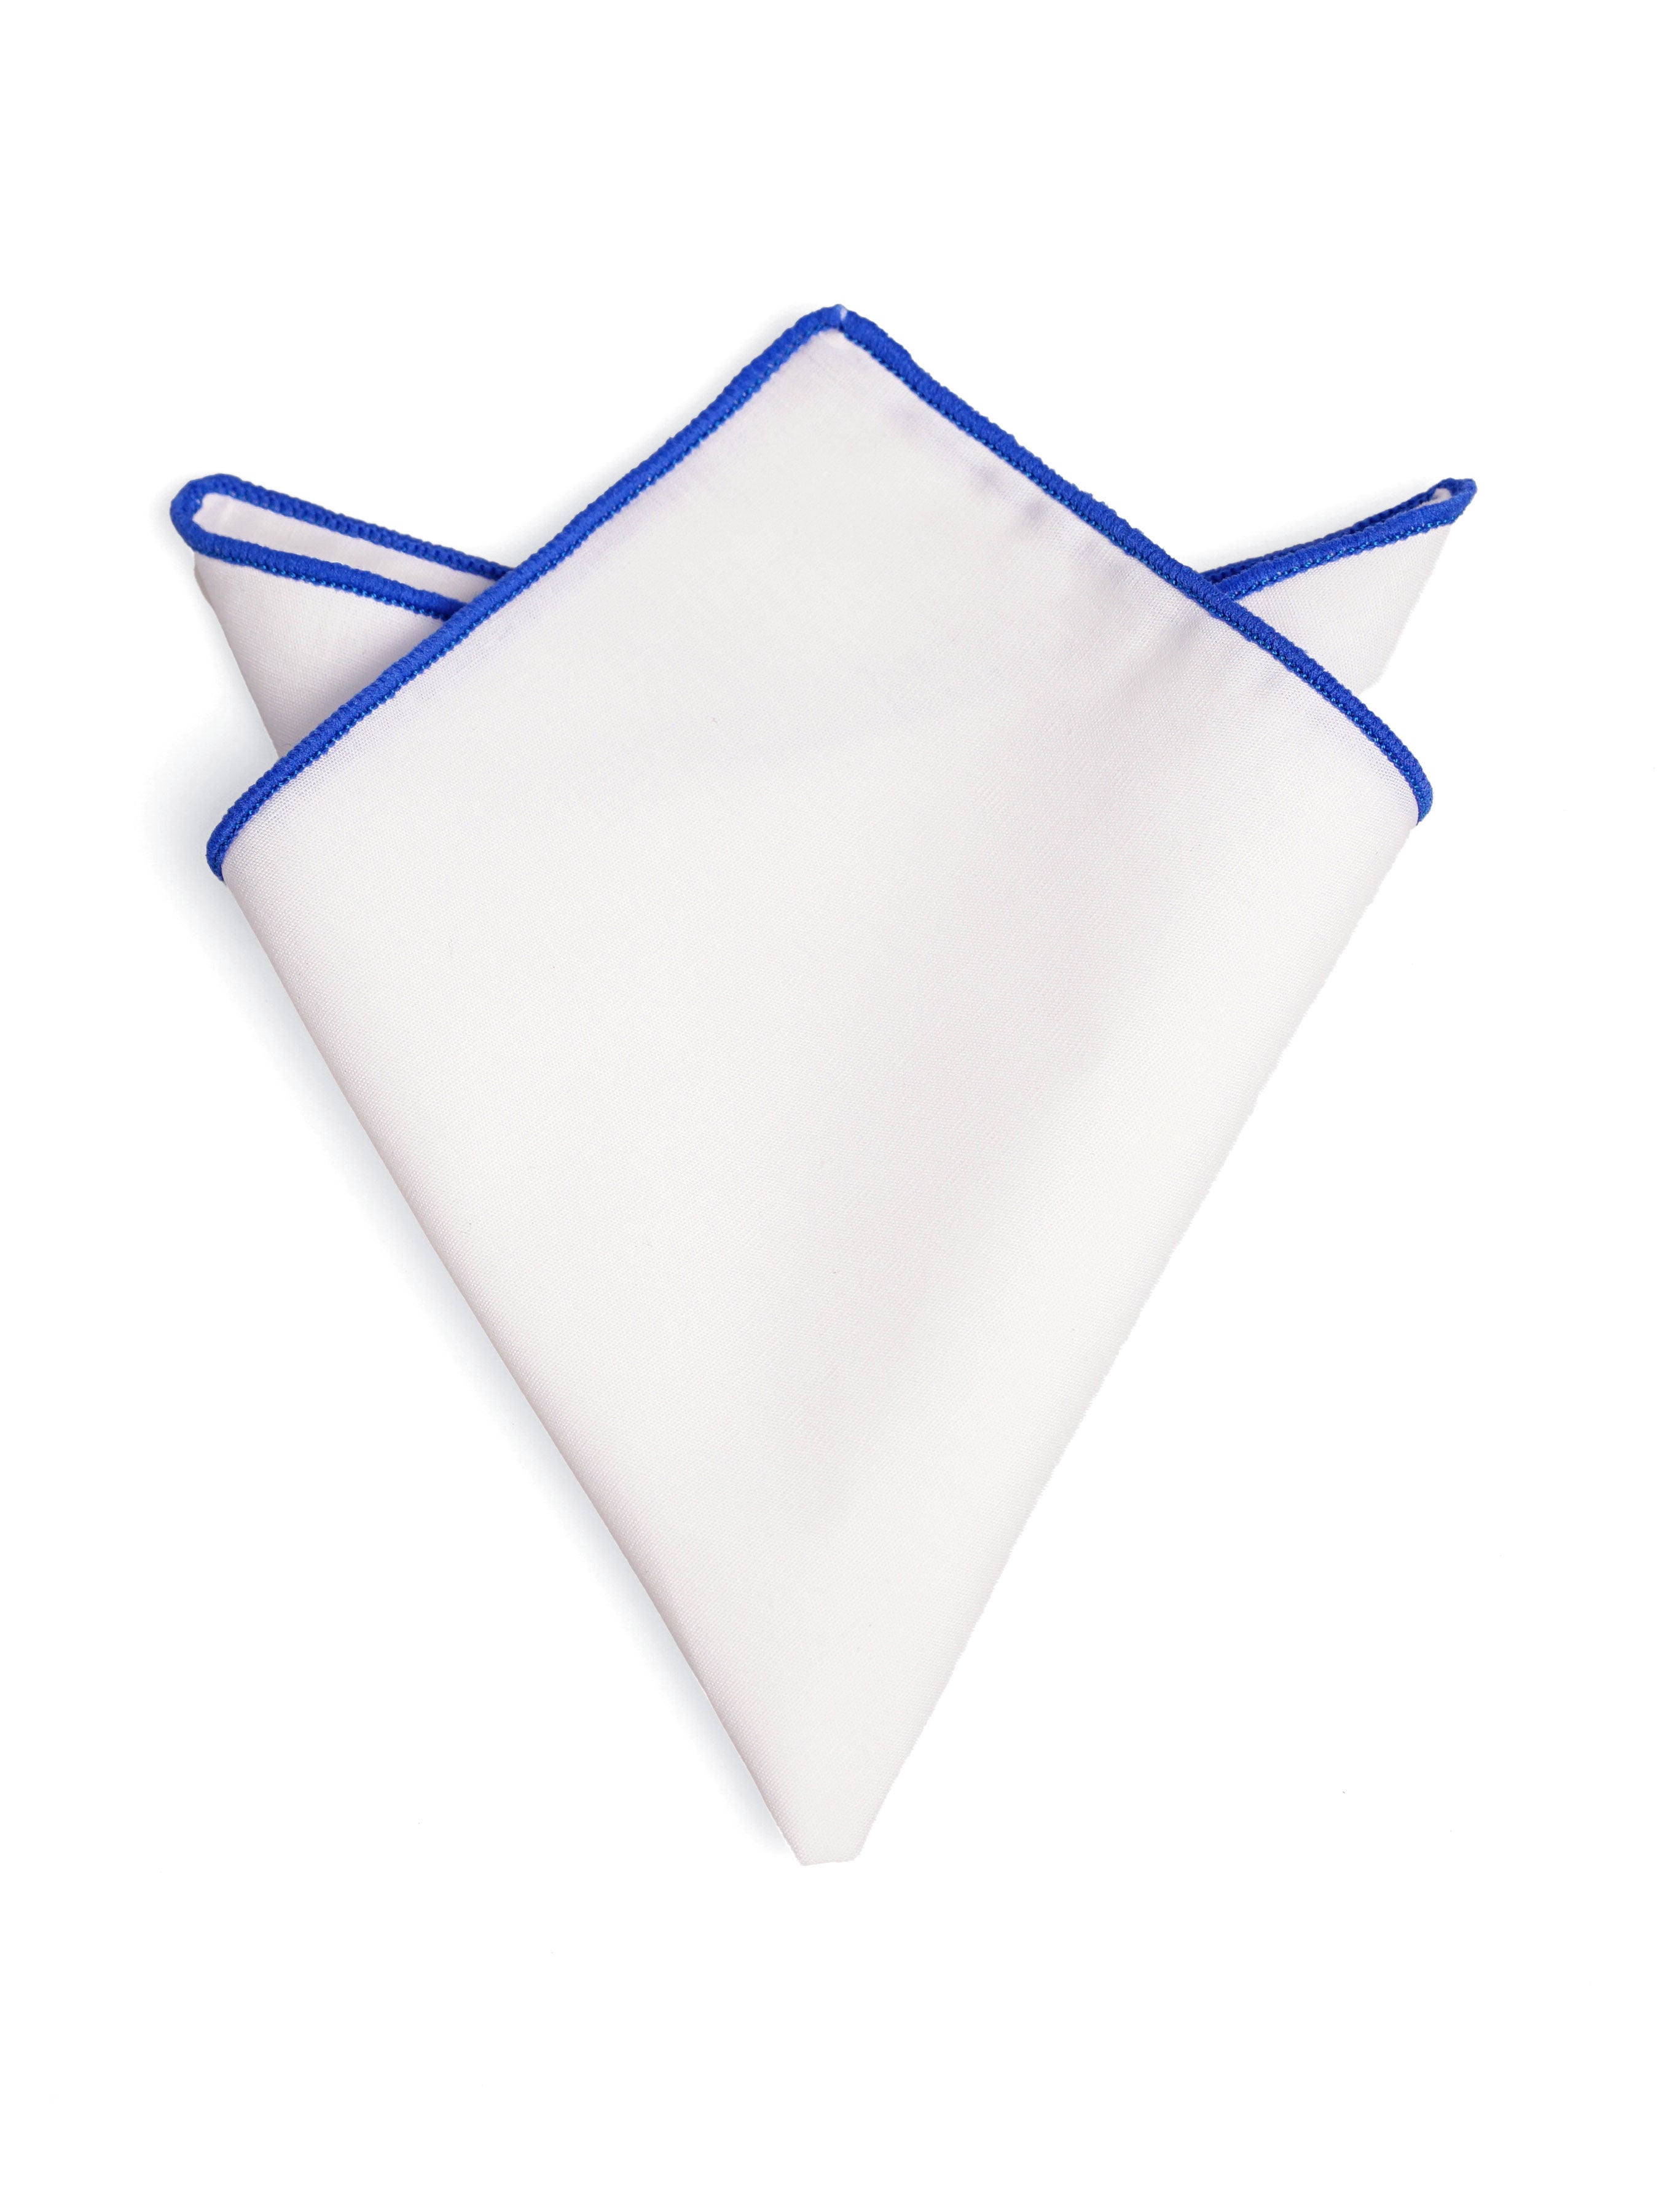 Cotton White Pocket Square with Contrast Piping - Zeve Shoes